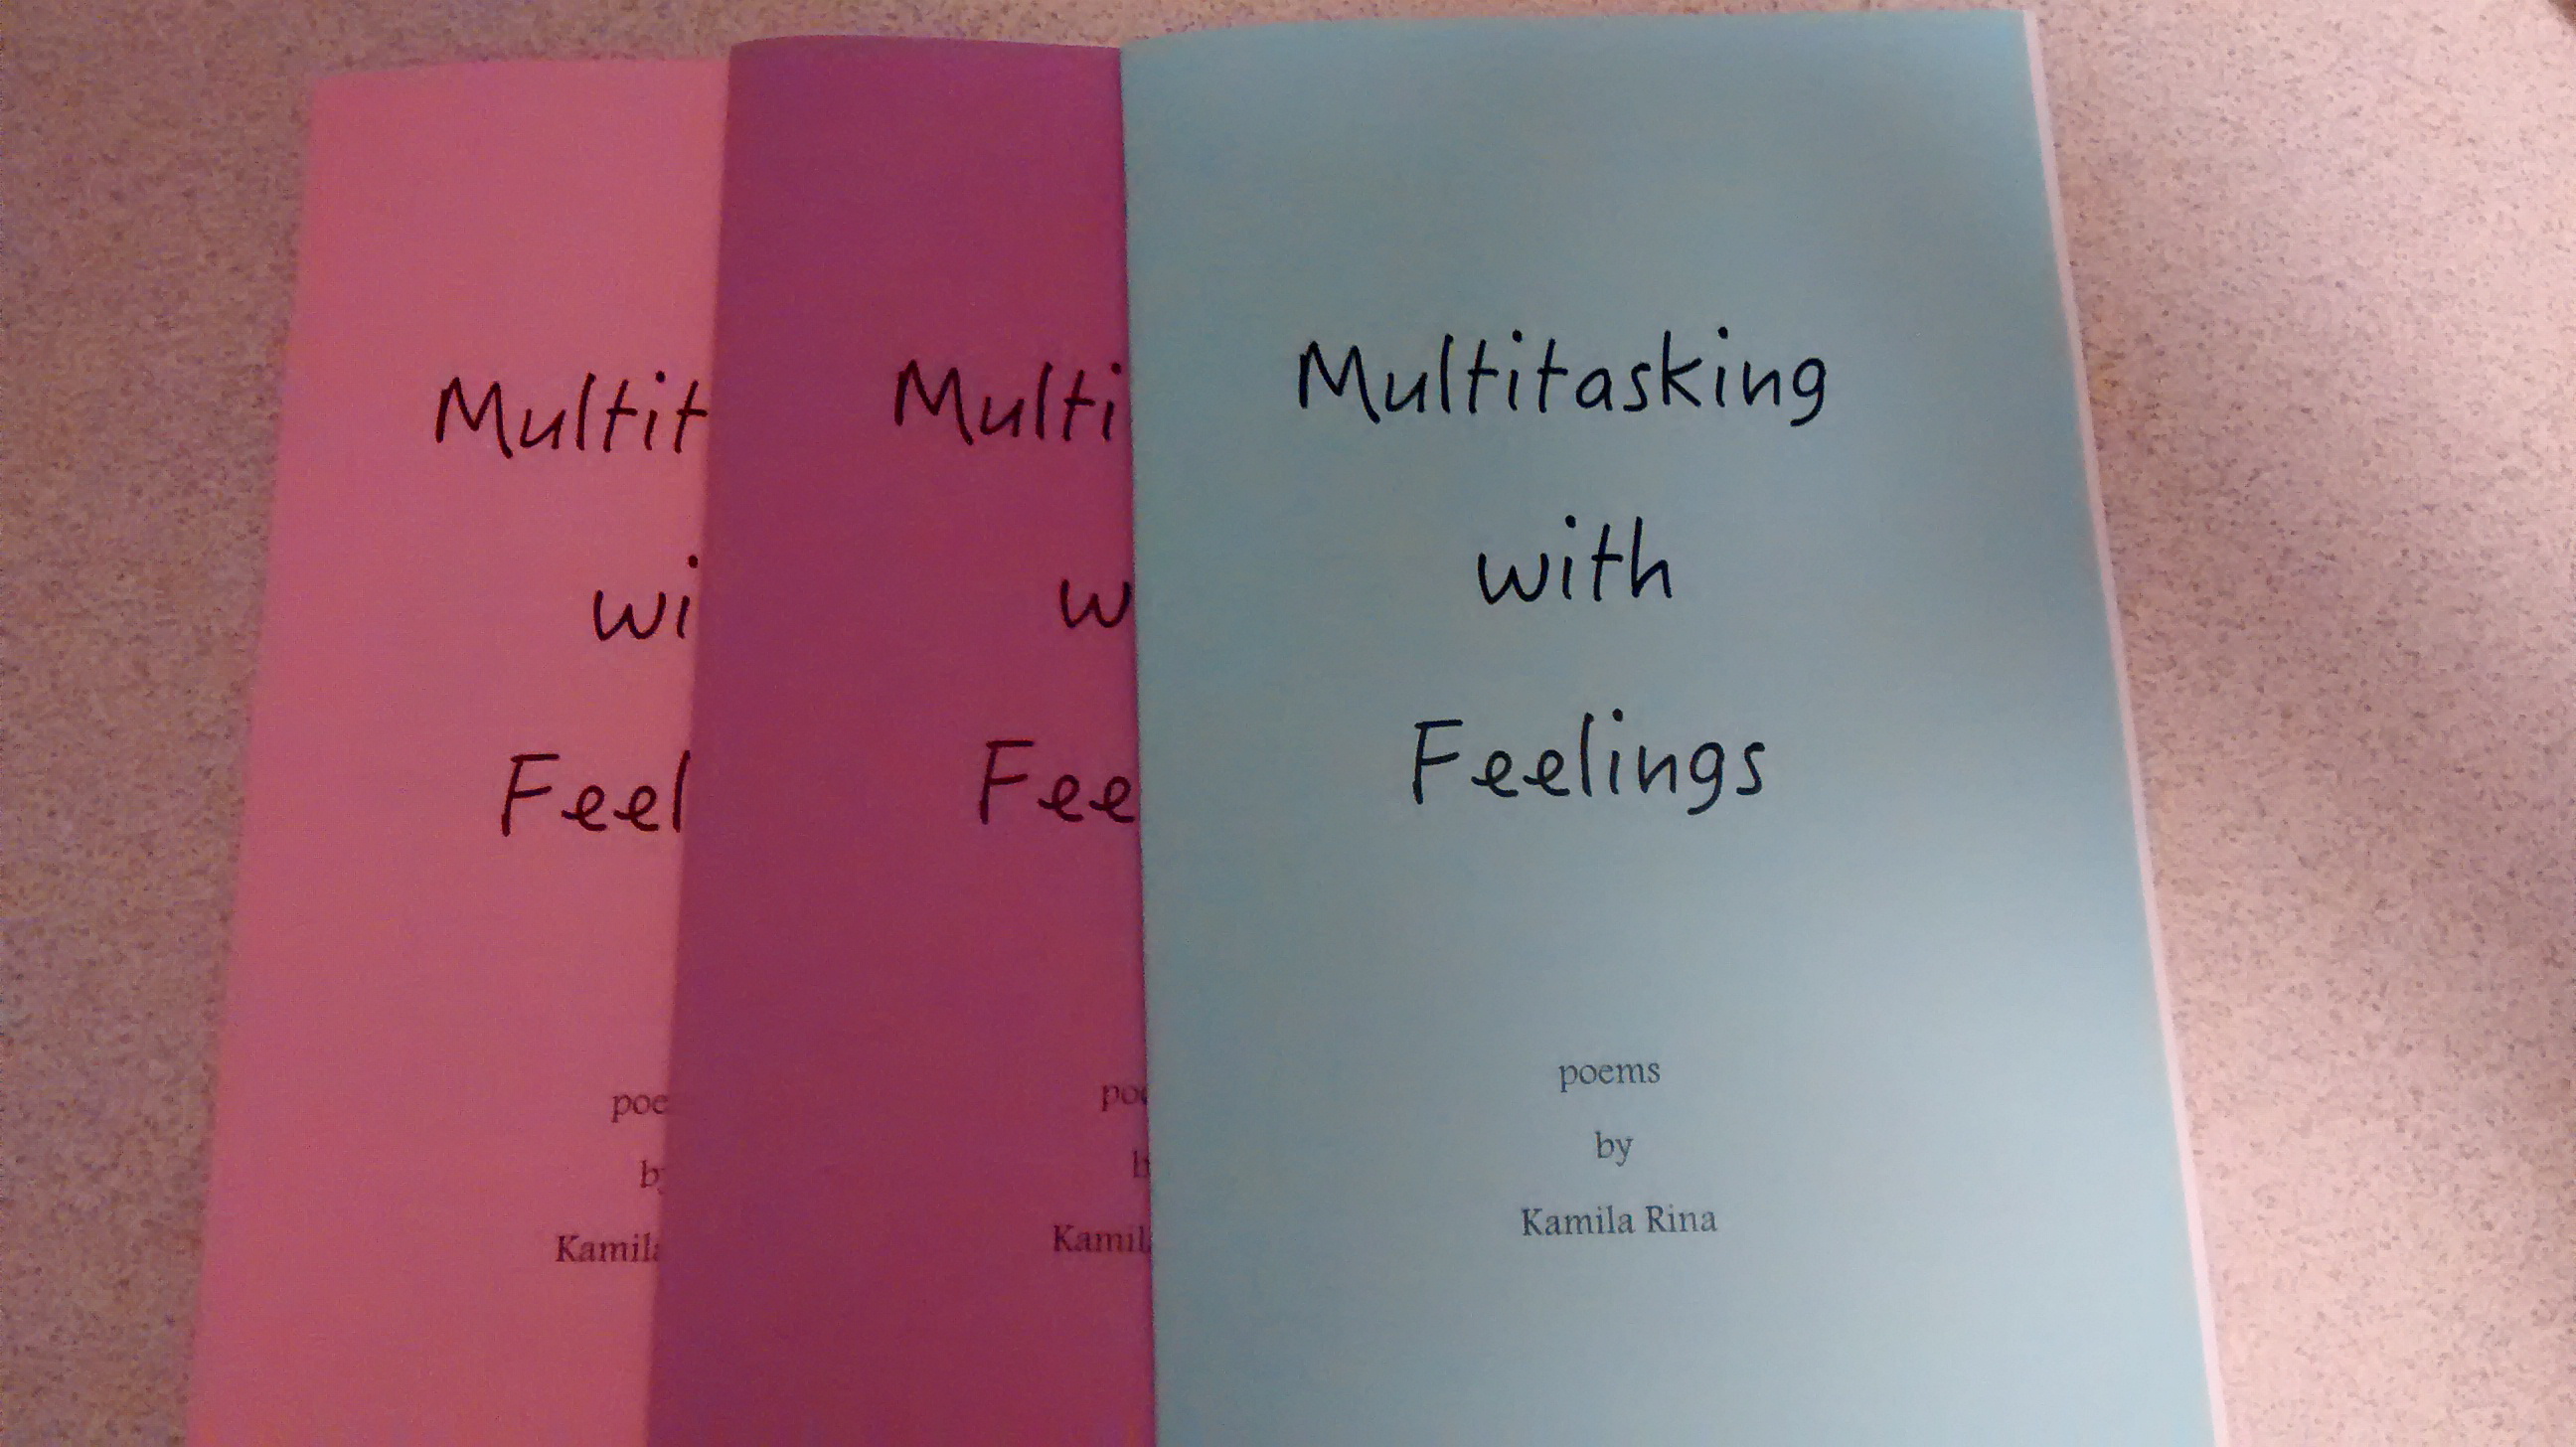 3 poetry chapbooks in pink, purple, and blue. All are titled "Multitasking with Feelings".